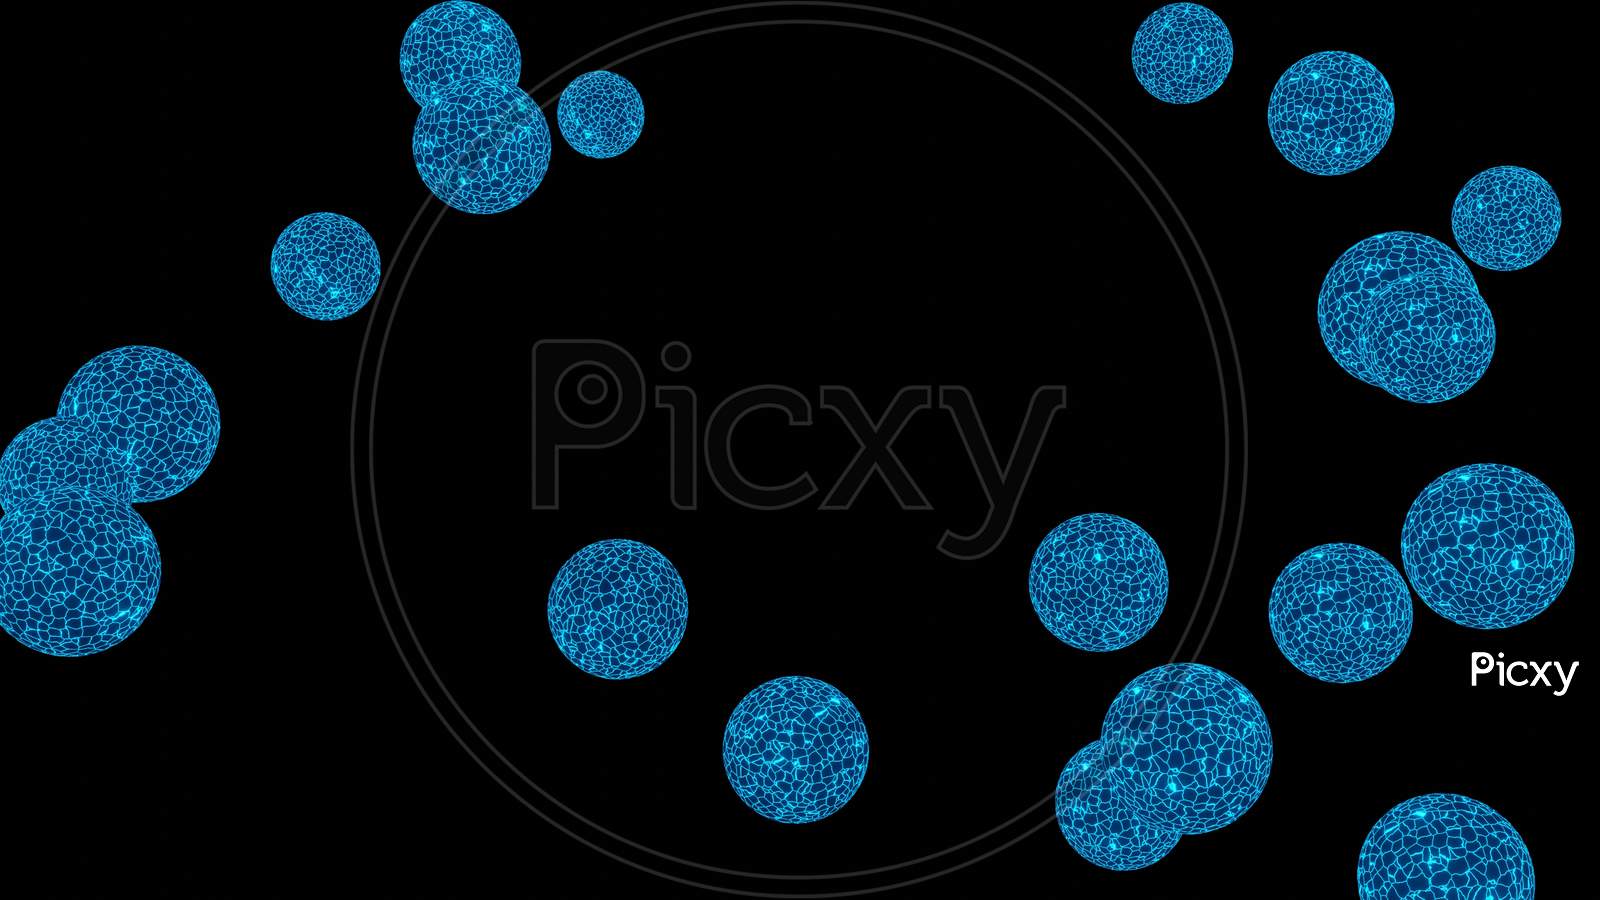 Illustration Graphic Of 3D Abstract Wired Frame Plasma Sphere Or Circle, Isolated On The Black Background. Blue Color Energy Ball Object Floating On The Frame.